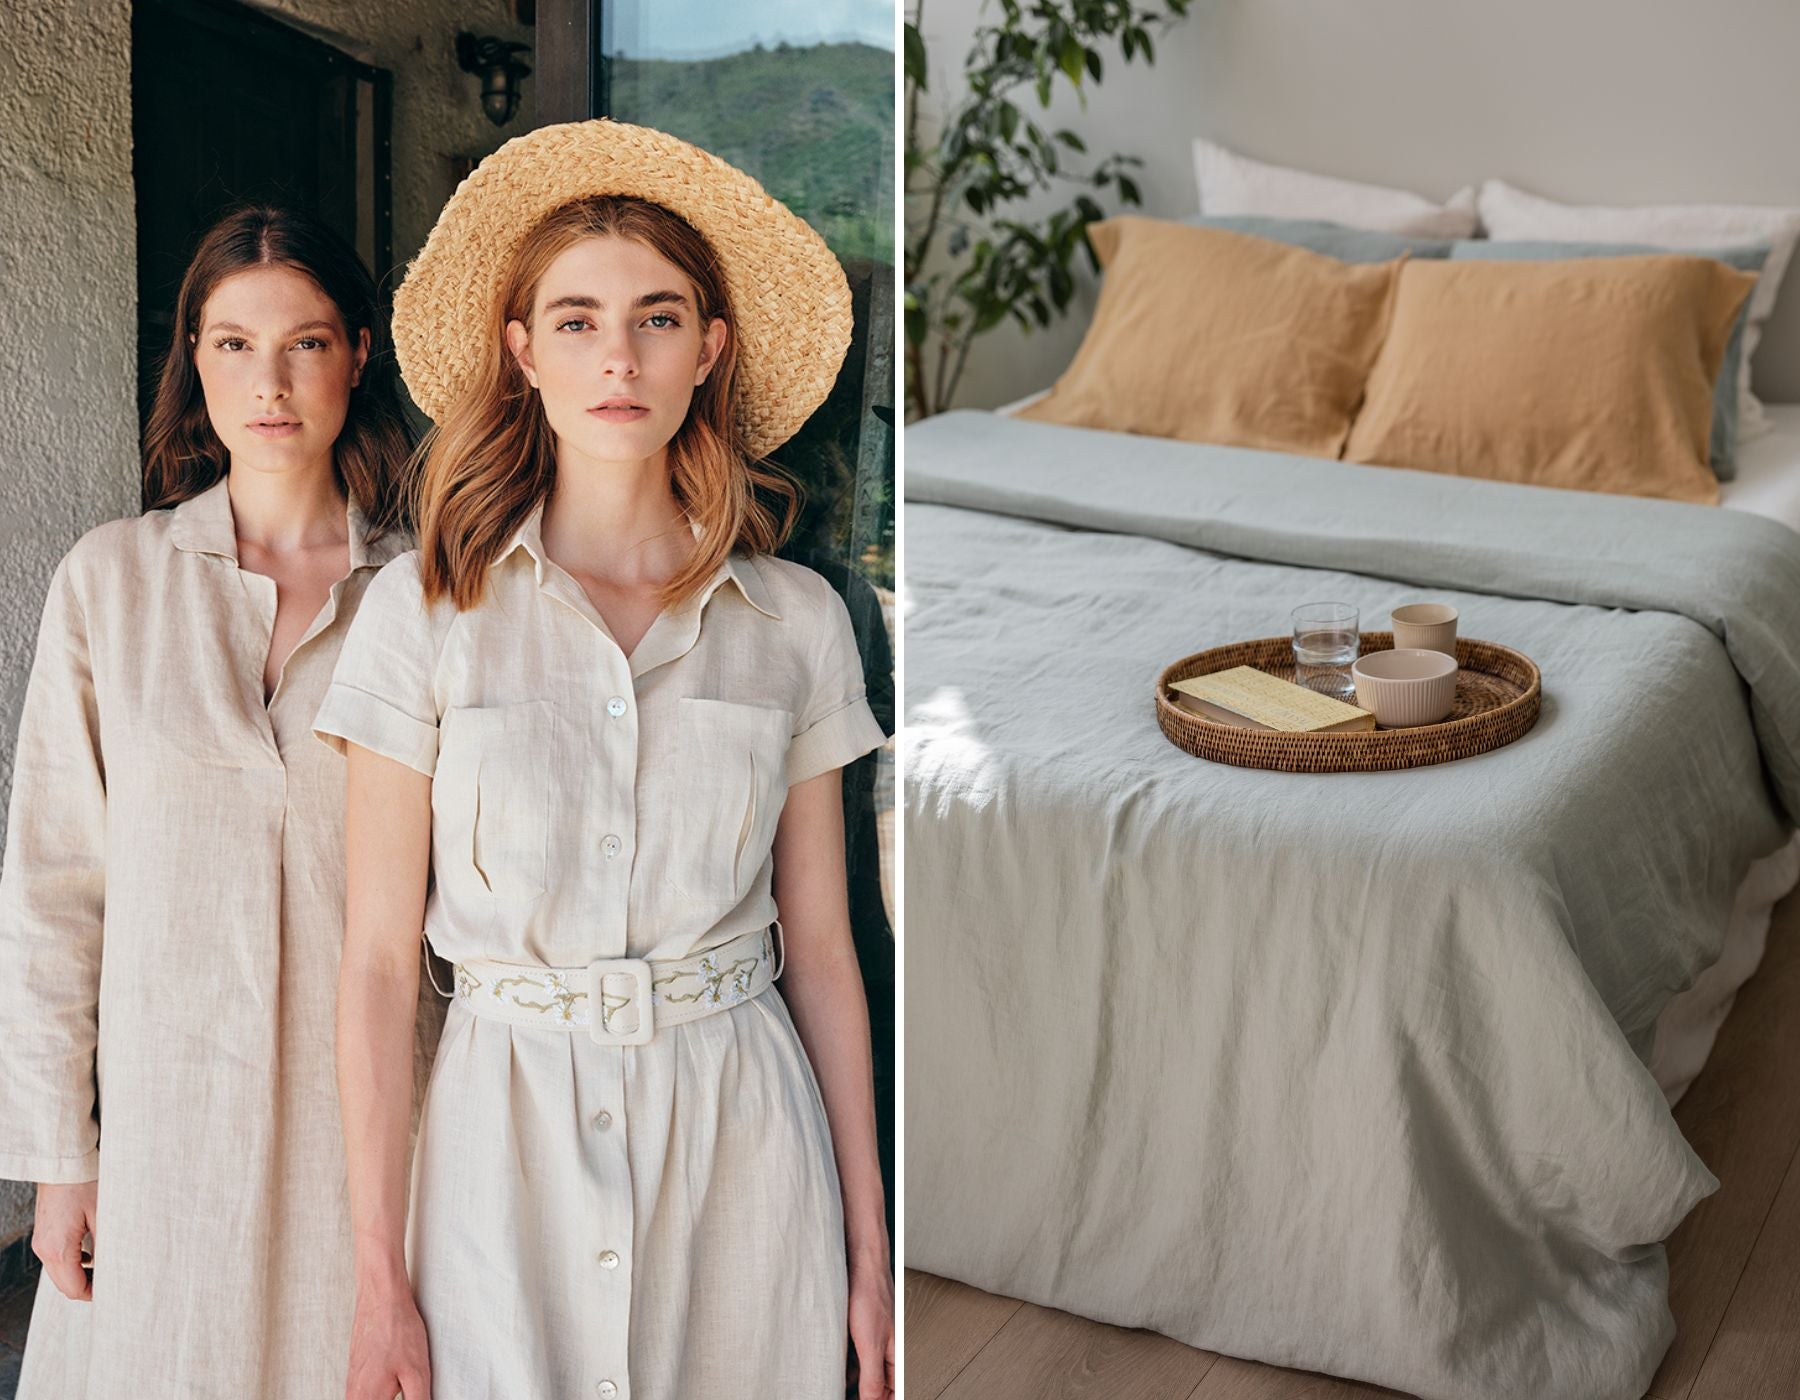 Women with linen clothes and a bed with linen sheets